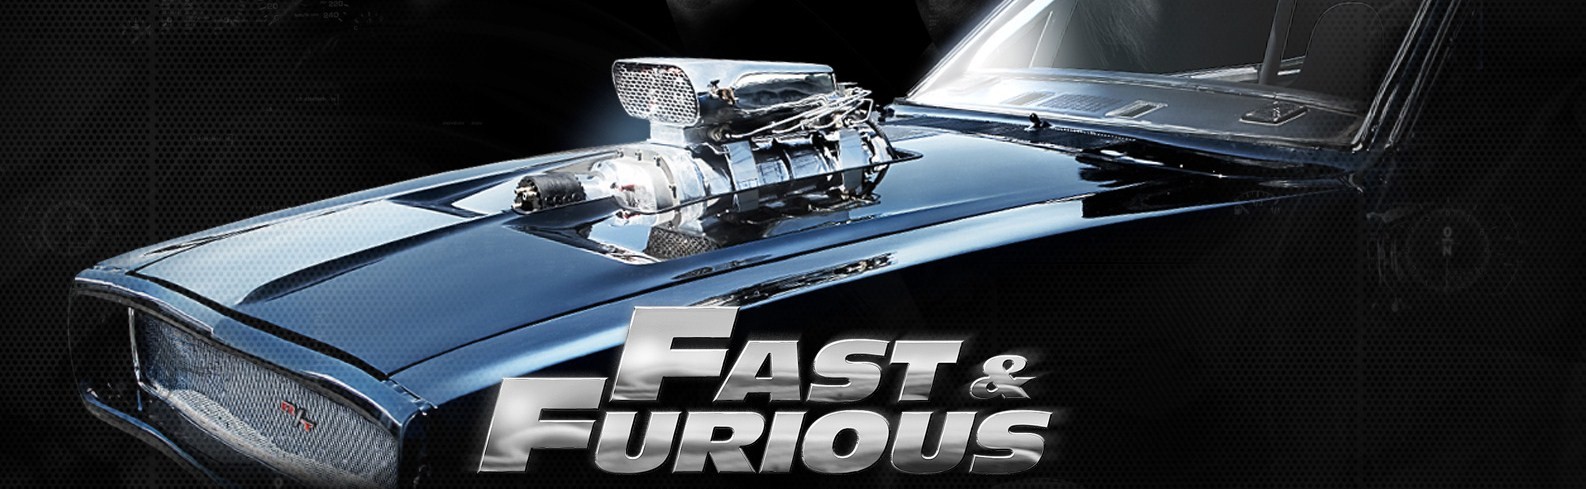 vin diesel fast and furious 1. vin diesel fast and furious